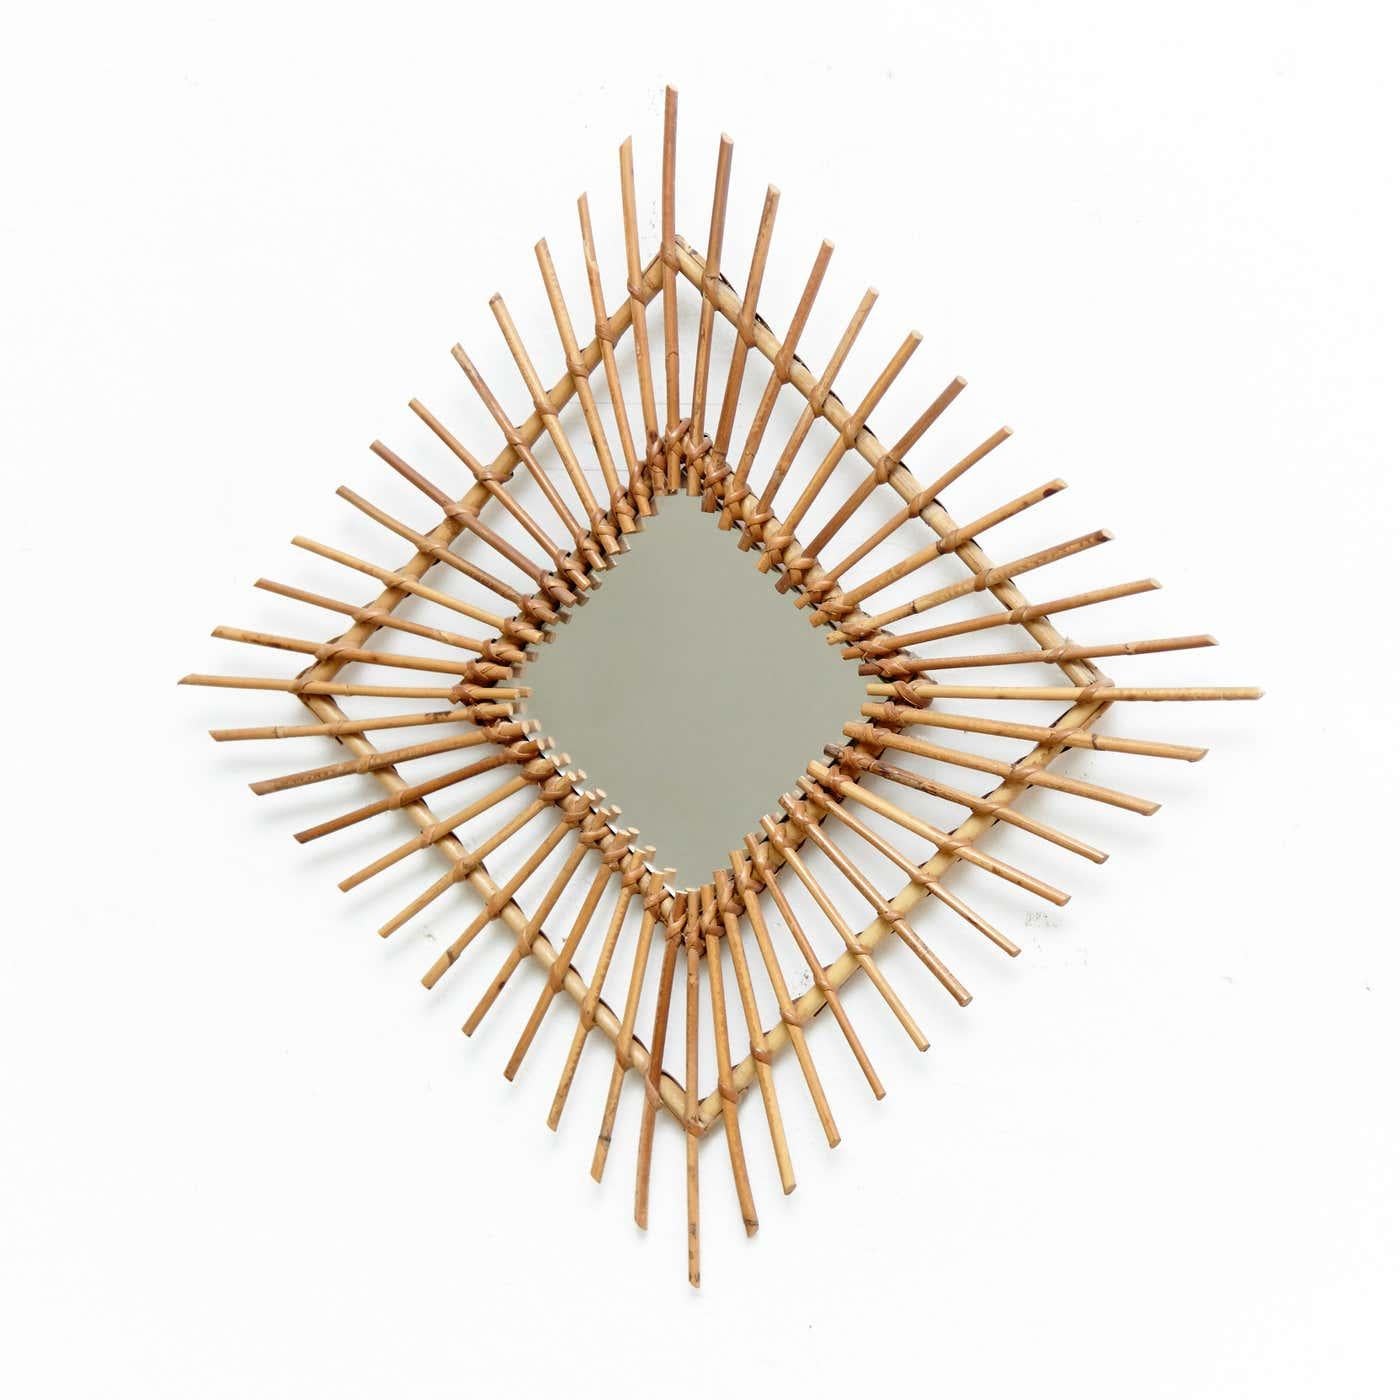 Mid-Century Modern mirror bamboo and rattan handcrafted, circa 1960

Experience the charm of Mid-Century Modern design with this traditionally manufactured French handcrafted bamboo and rattan mirror, created by an unknown designer circa 1960. The